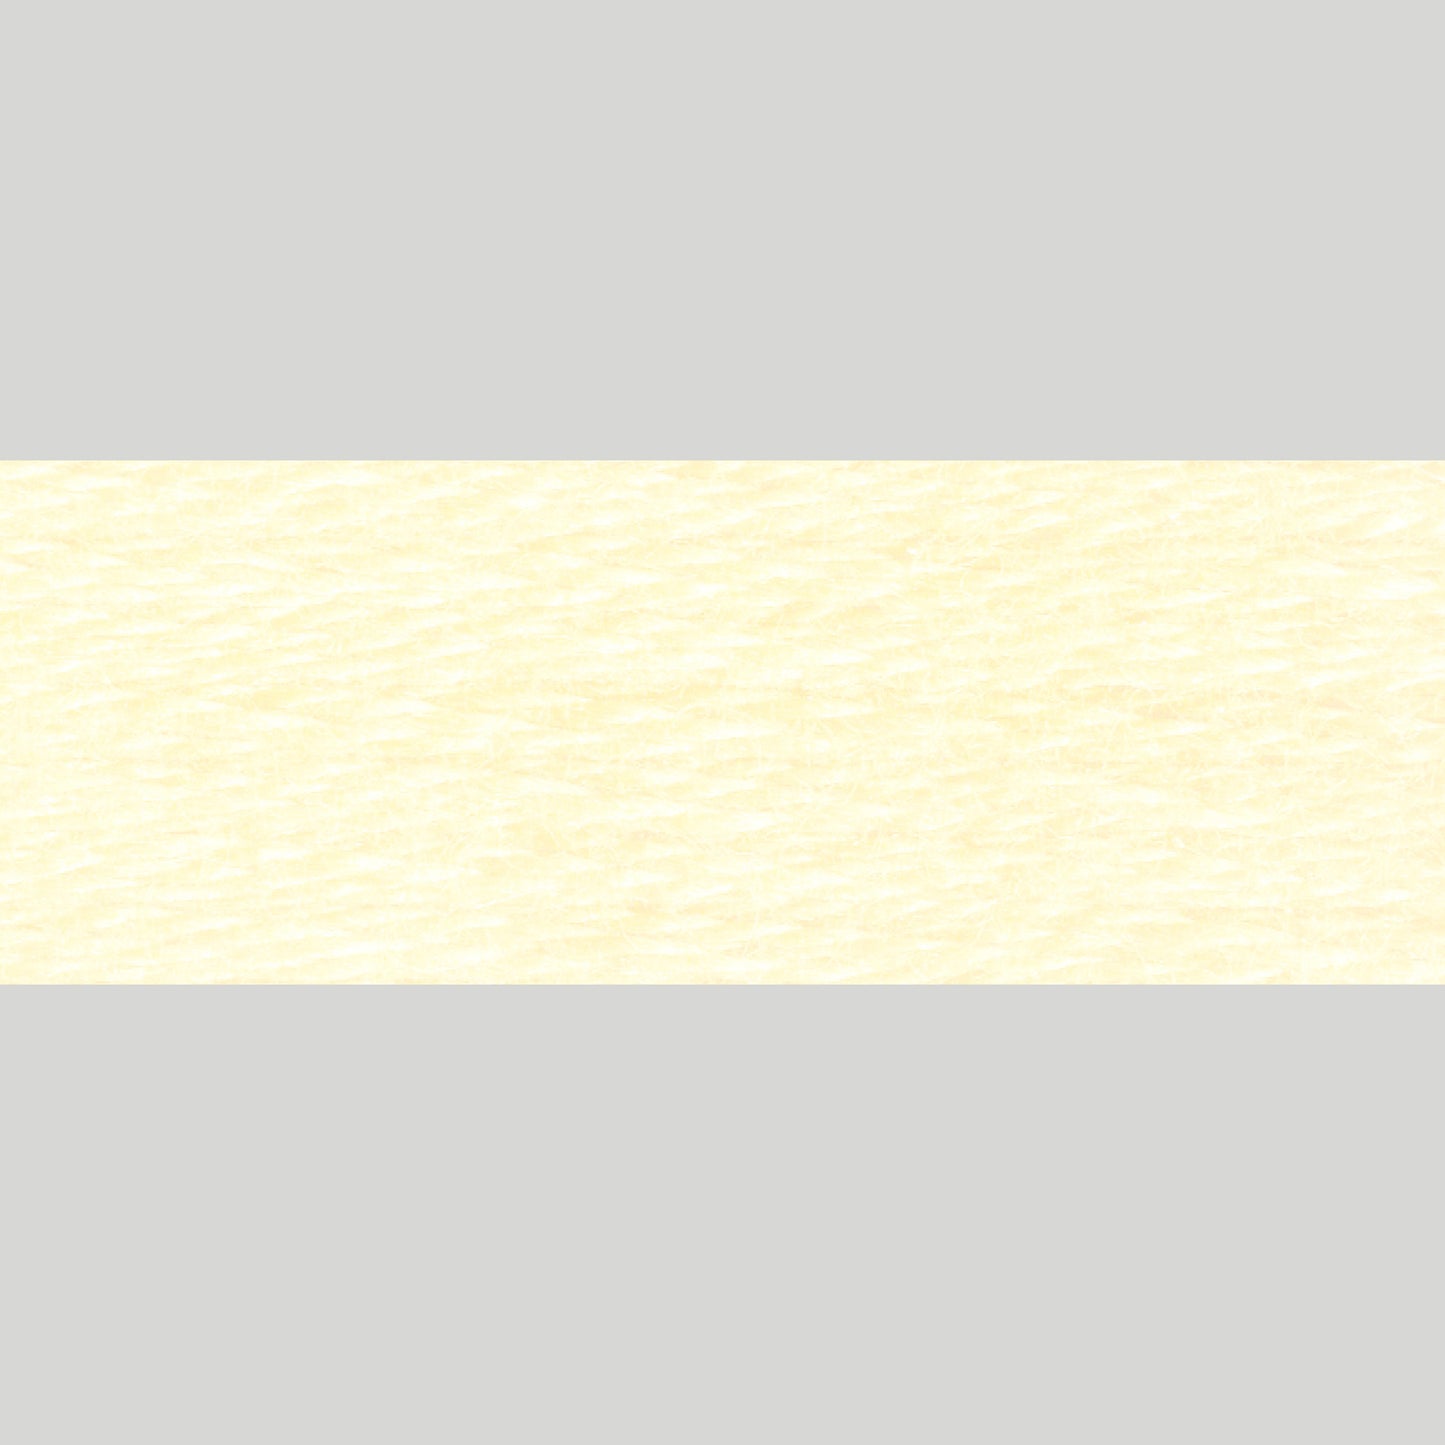 DMC Embroidery Floss - 3823 Ultra Pale Yellow Alternative View #1